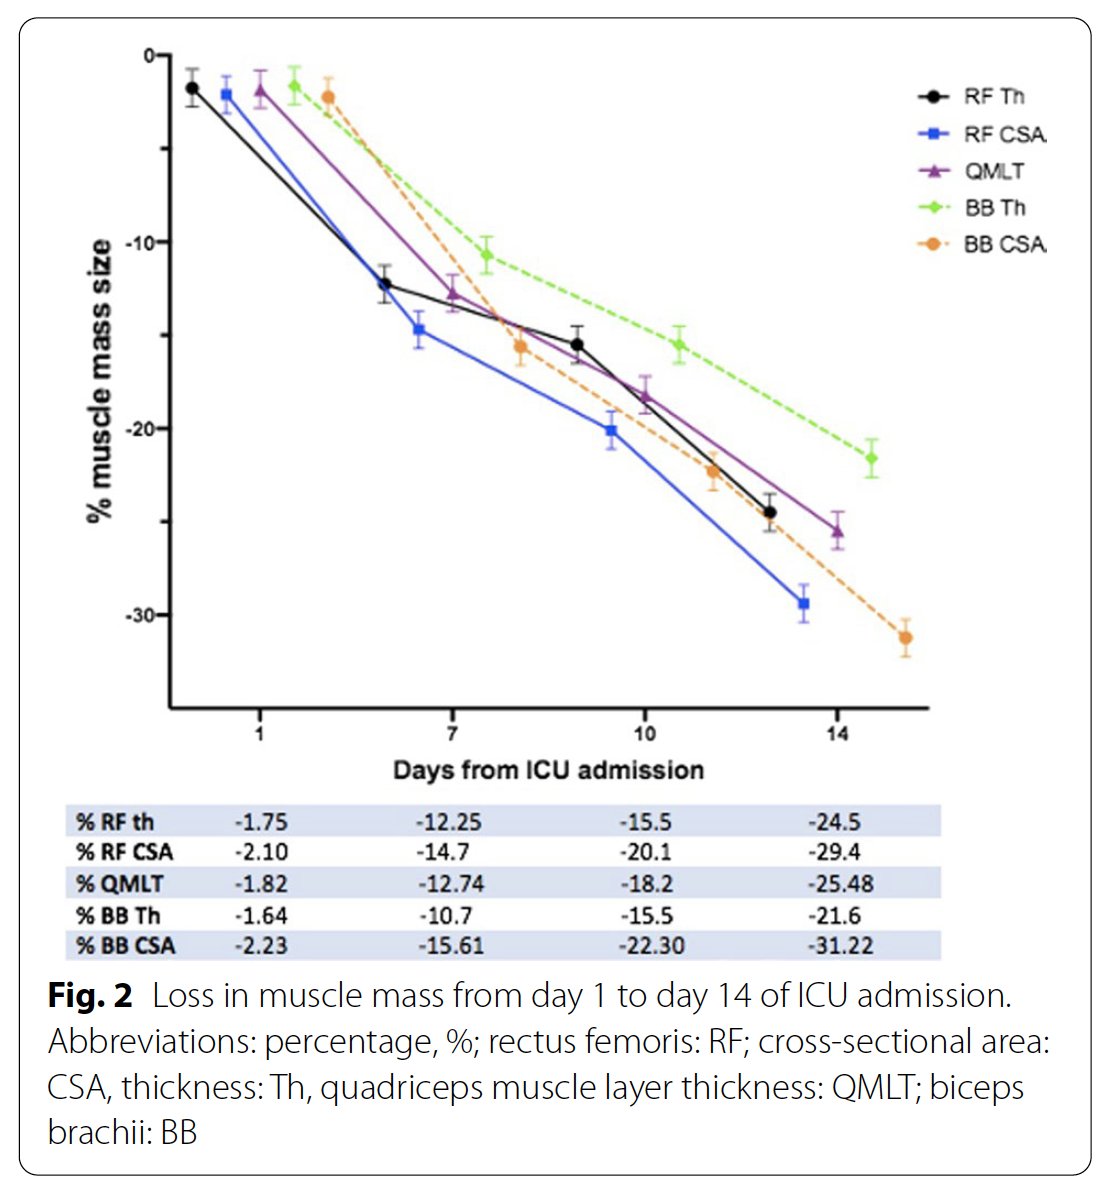 Did you know that on average, critically ill patients lose nearly 2% of skeletal muscle per day? Can we change this? A collaborative work by @fazzini_b @JohnProwle @Zudin_P @DrStefan2 @HeWaHippo just published on @Crit_Care ccforum.biomedcentral.com/articles/10.11…